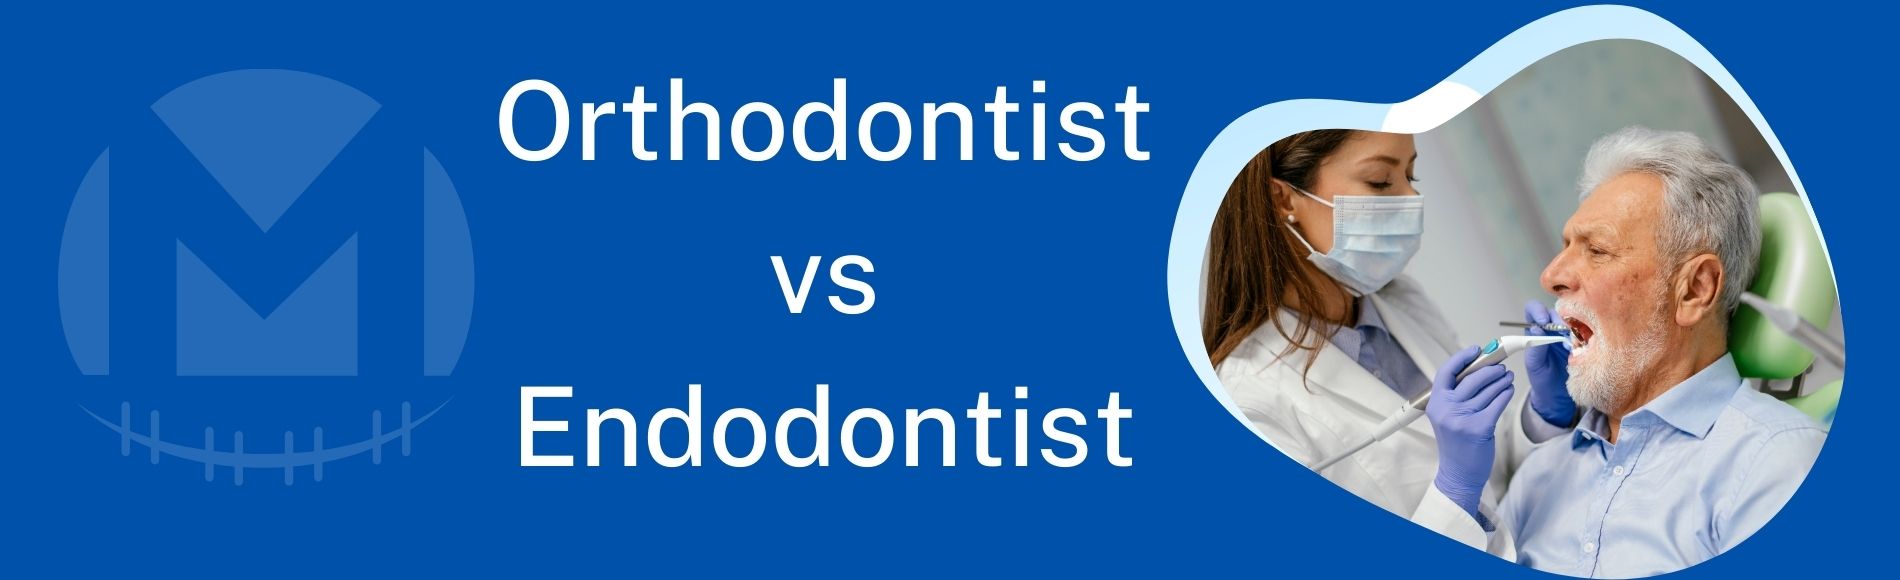 Orthodontist vs Endodontist: What Are The Key Differences?